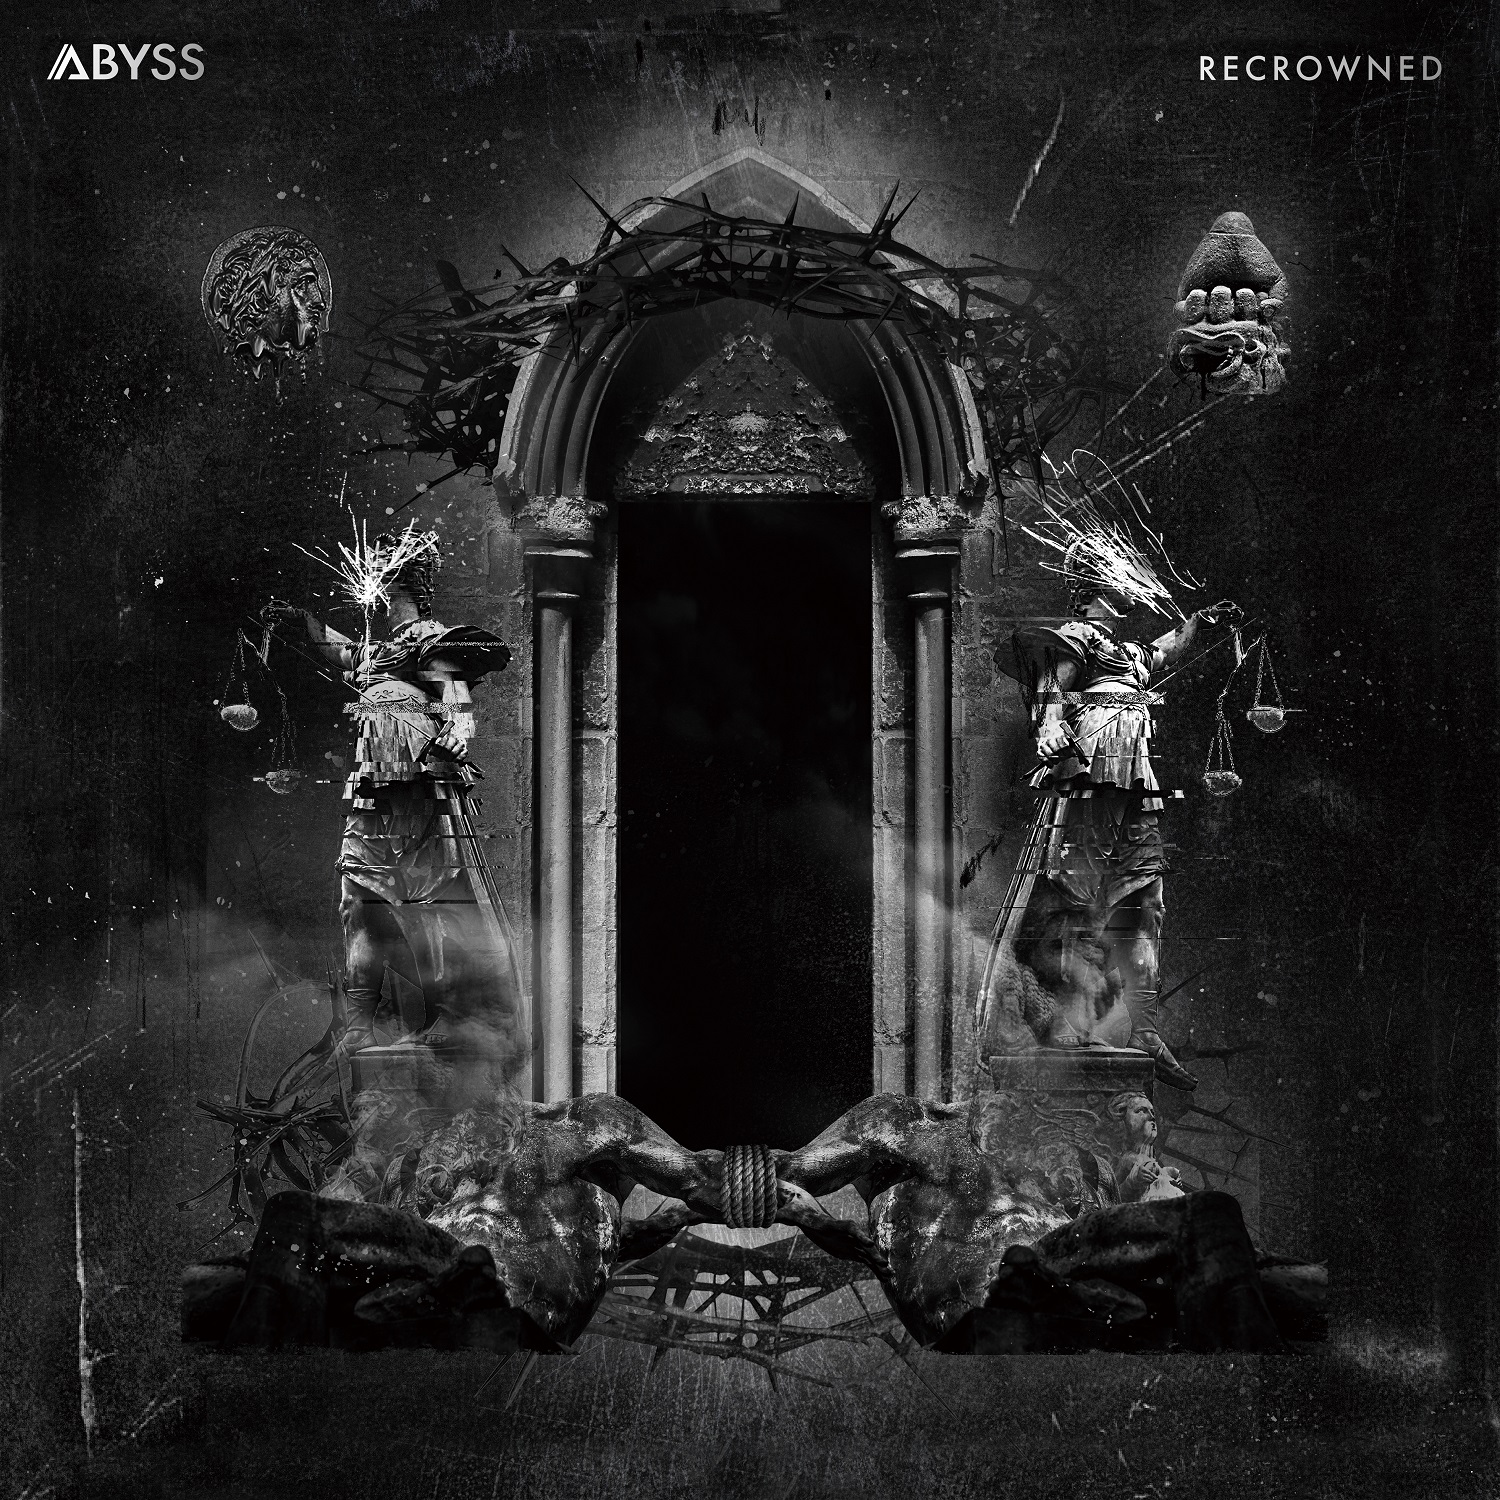 Abyss_Recrowned_Cover_Art.jpg